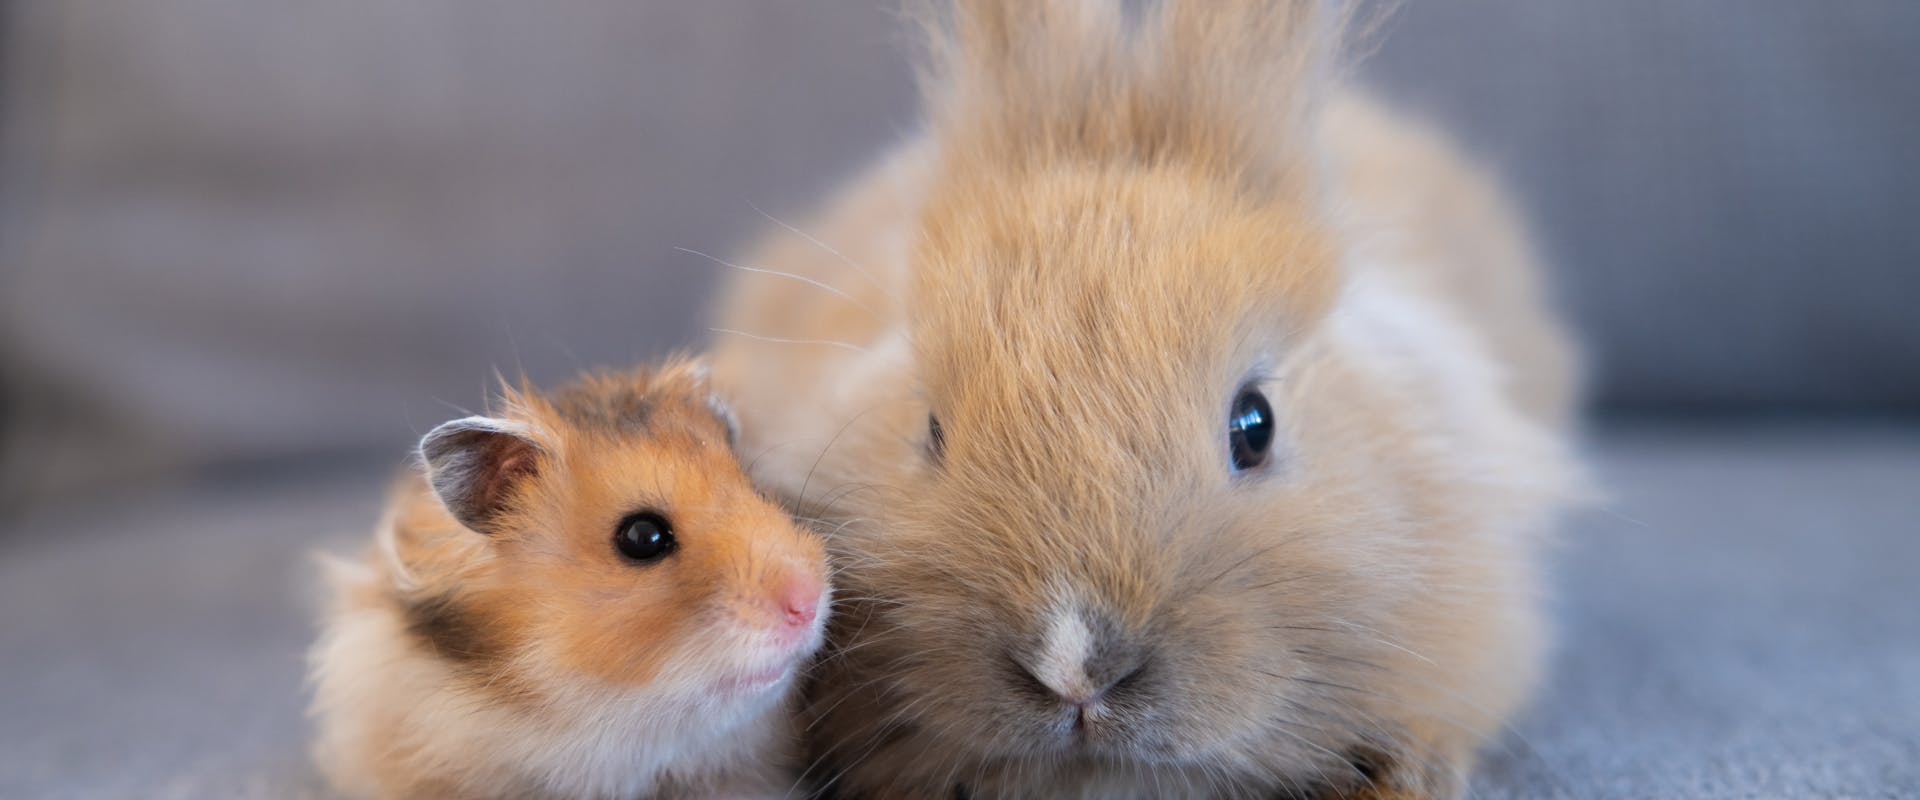 two pocket pets, a hamster and a baby rabbit, sat next to each other on a gray couch.